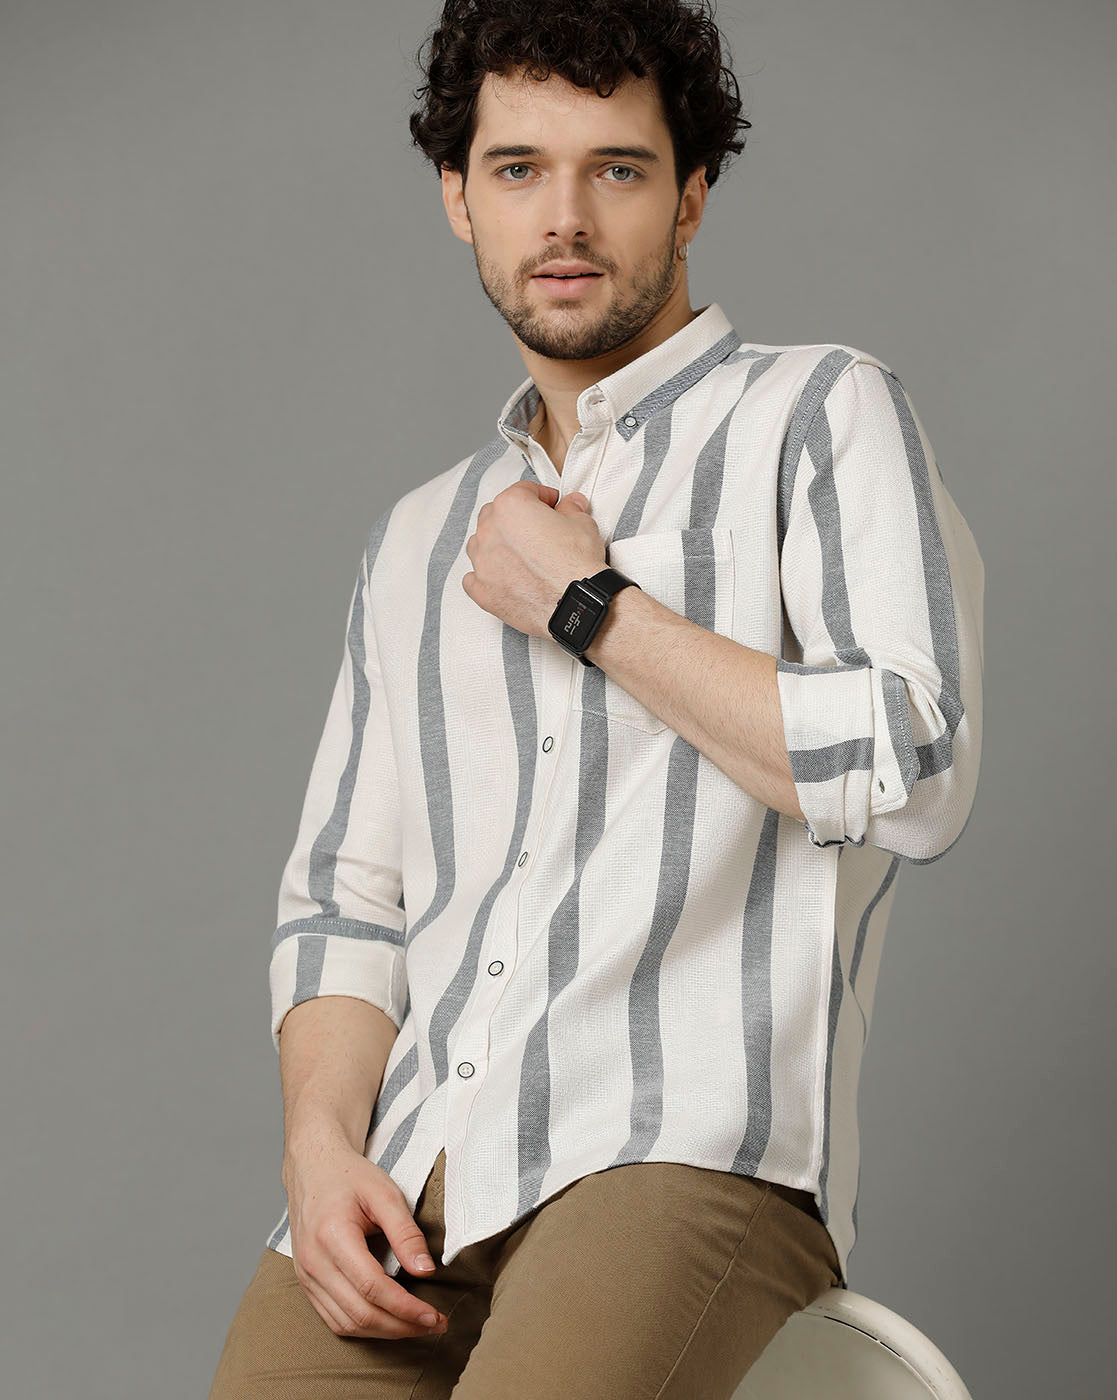 Blue and white striped shirt mens